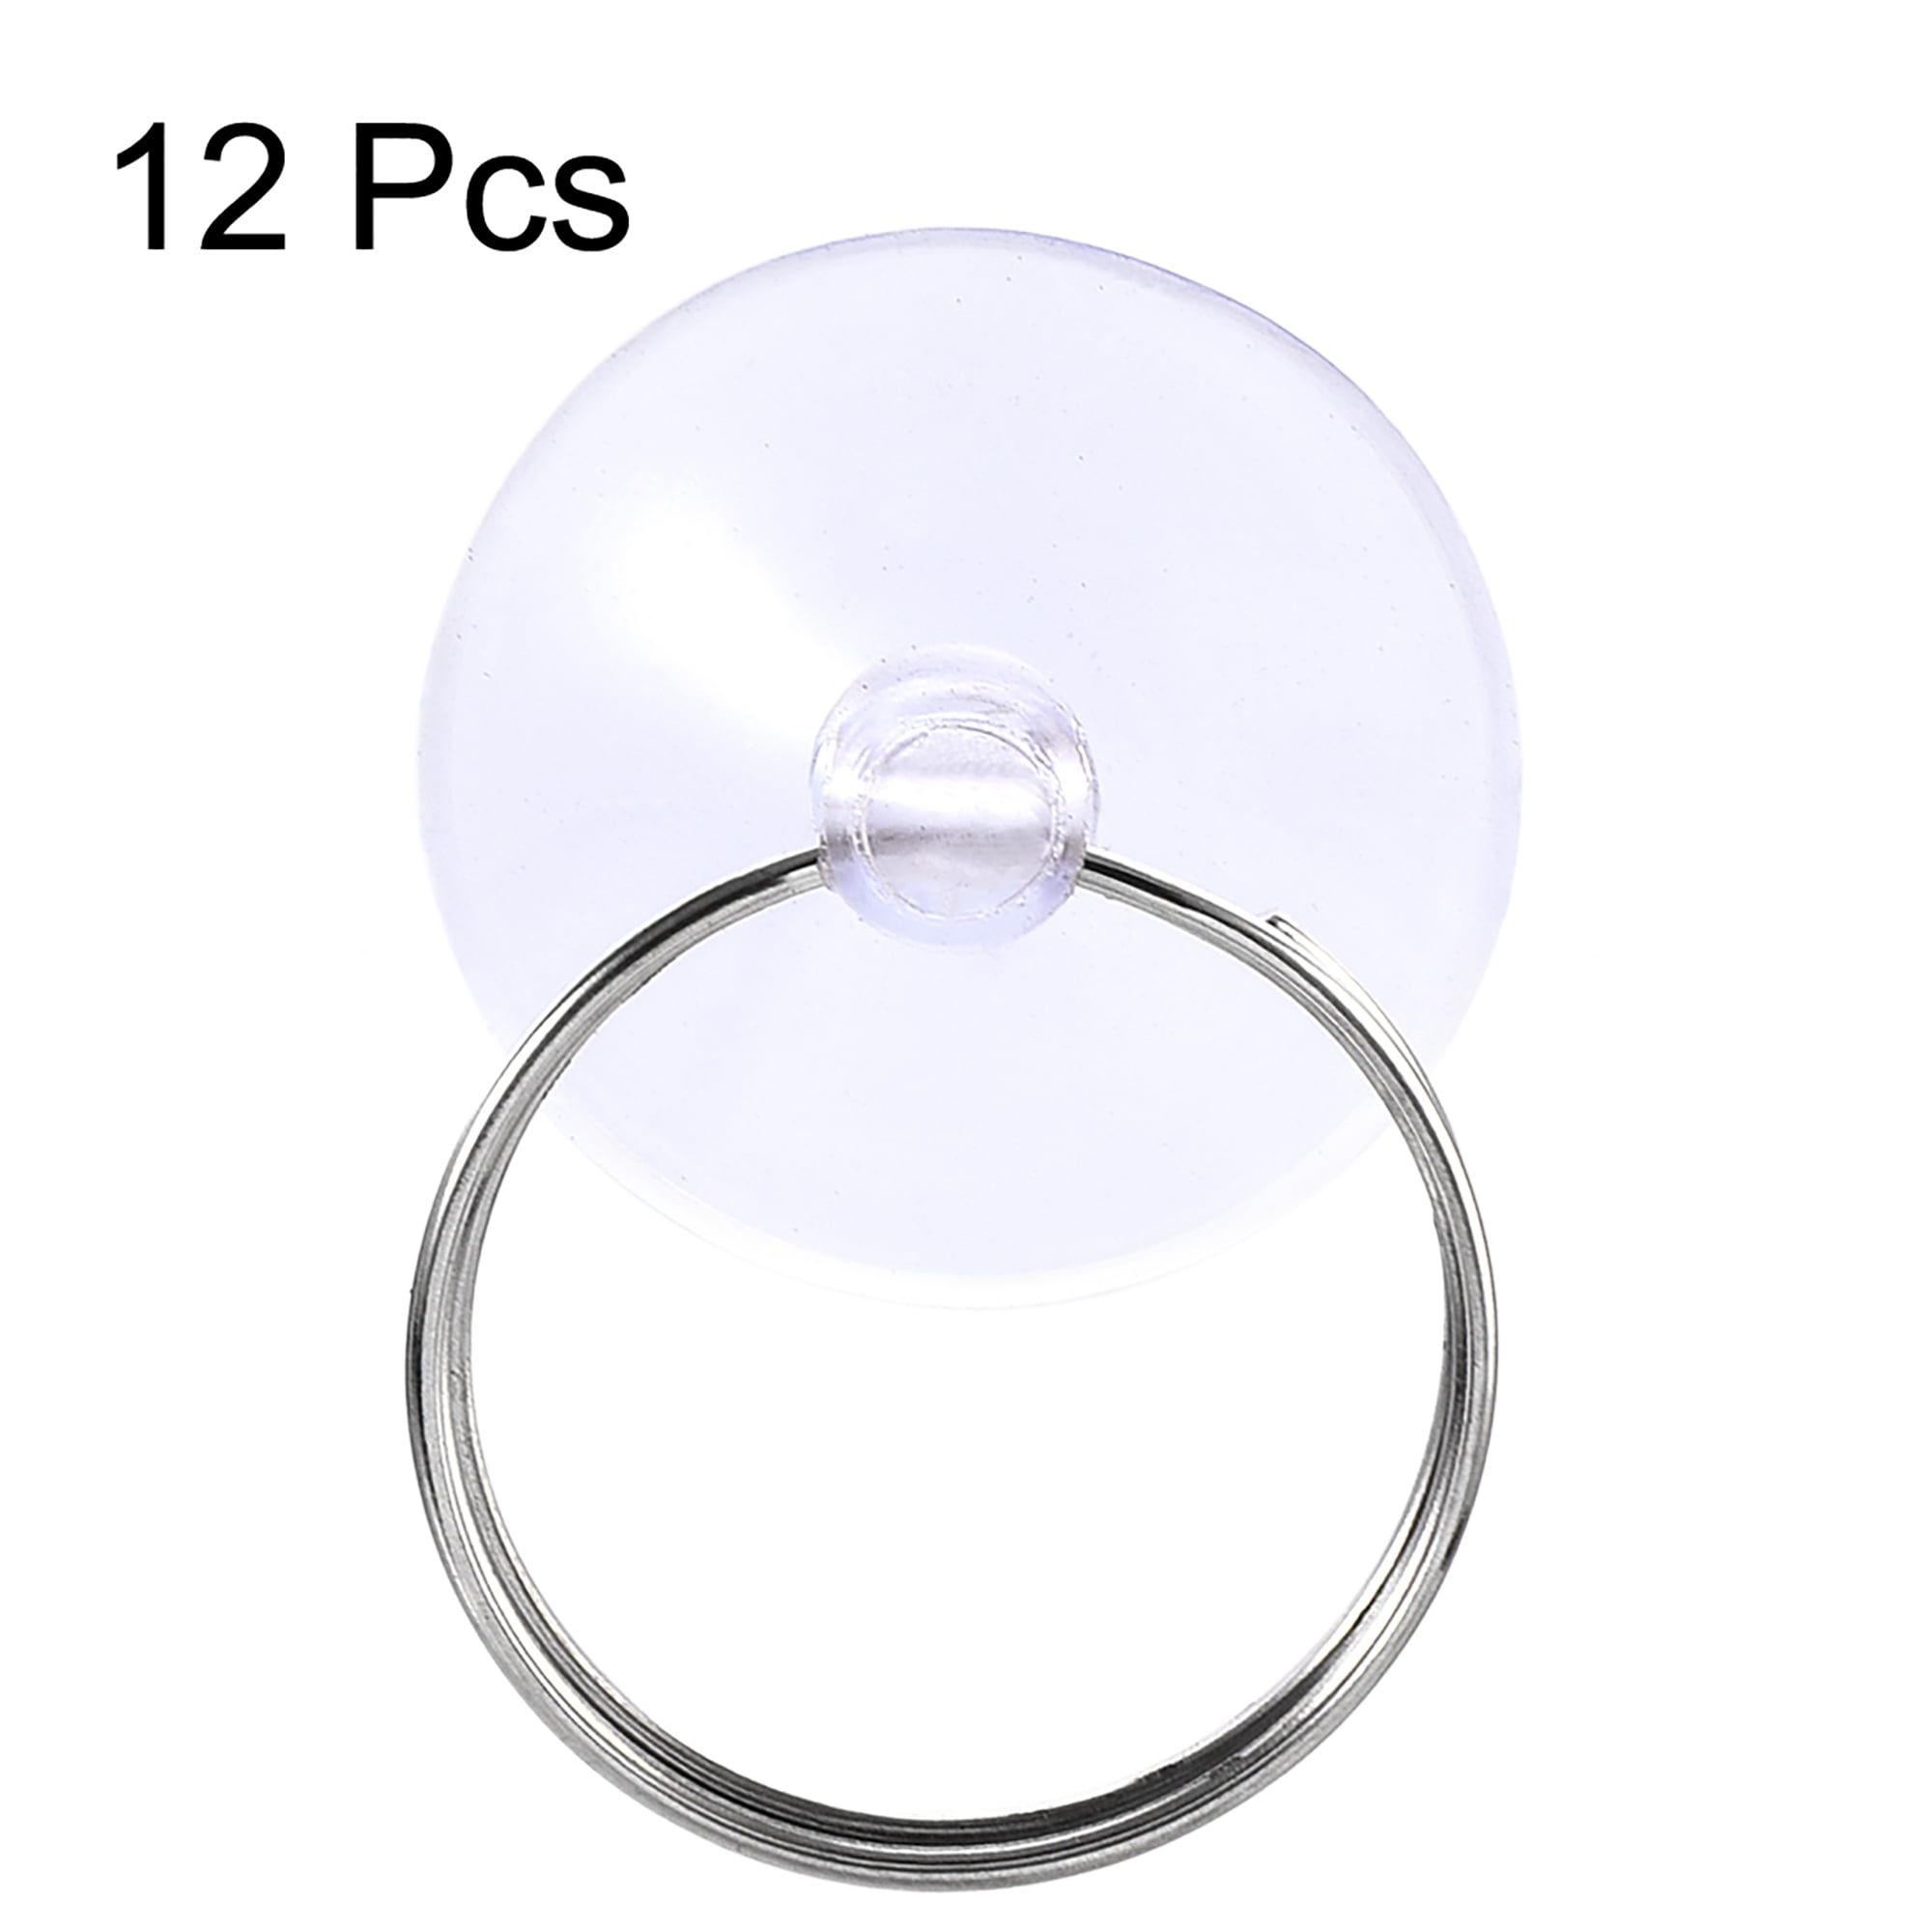 12 Pcs Suction Cup Hooks 55mm Dia Clear Thicken PVC with Metal Ring Hook 